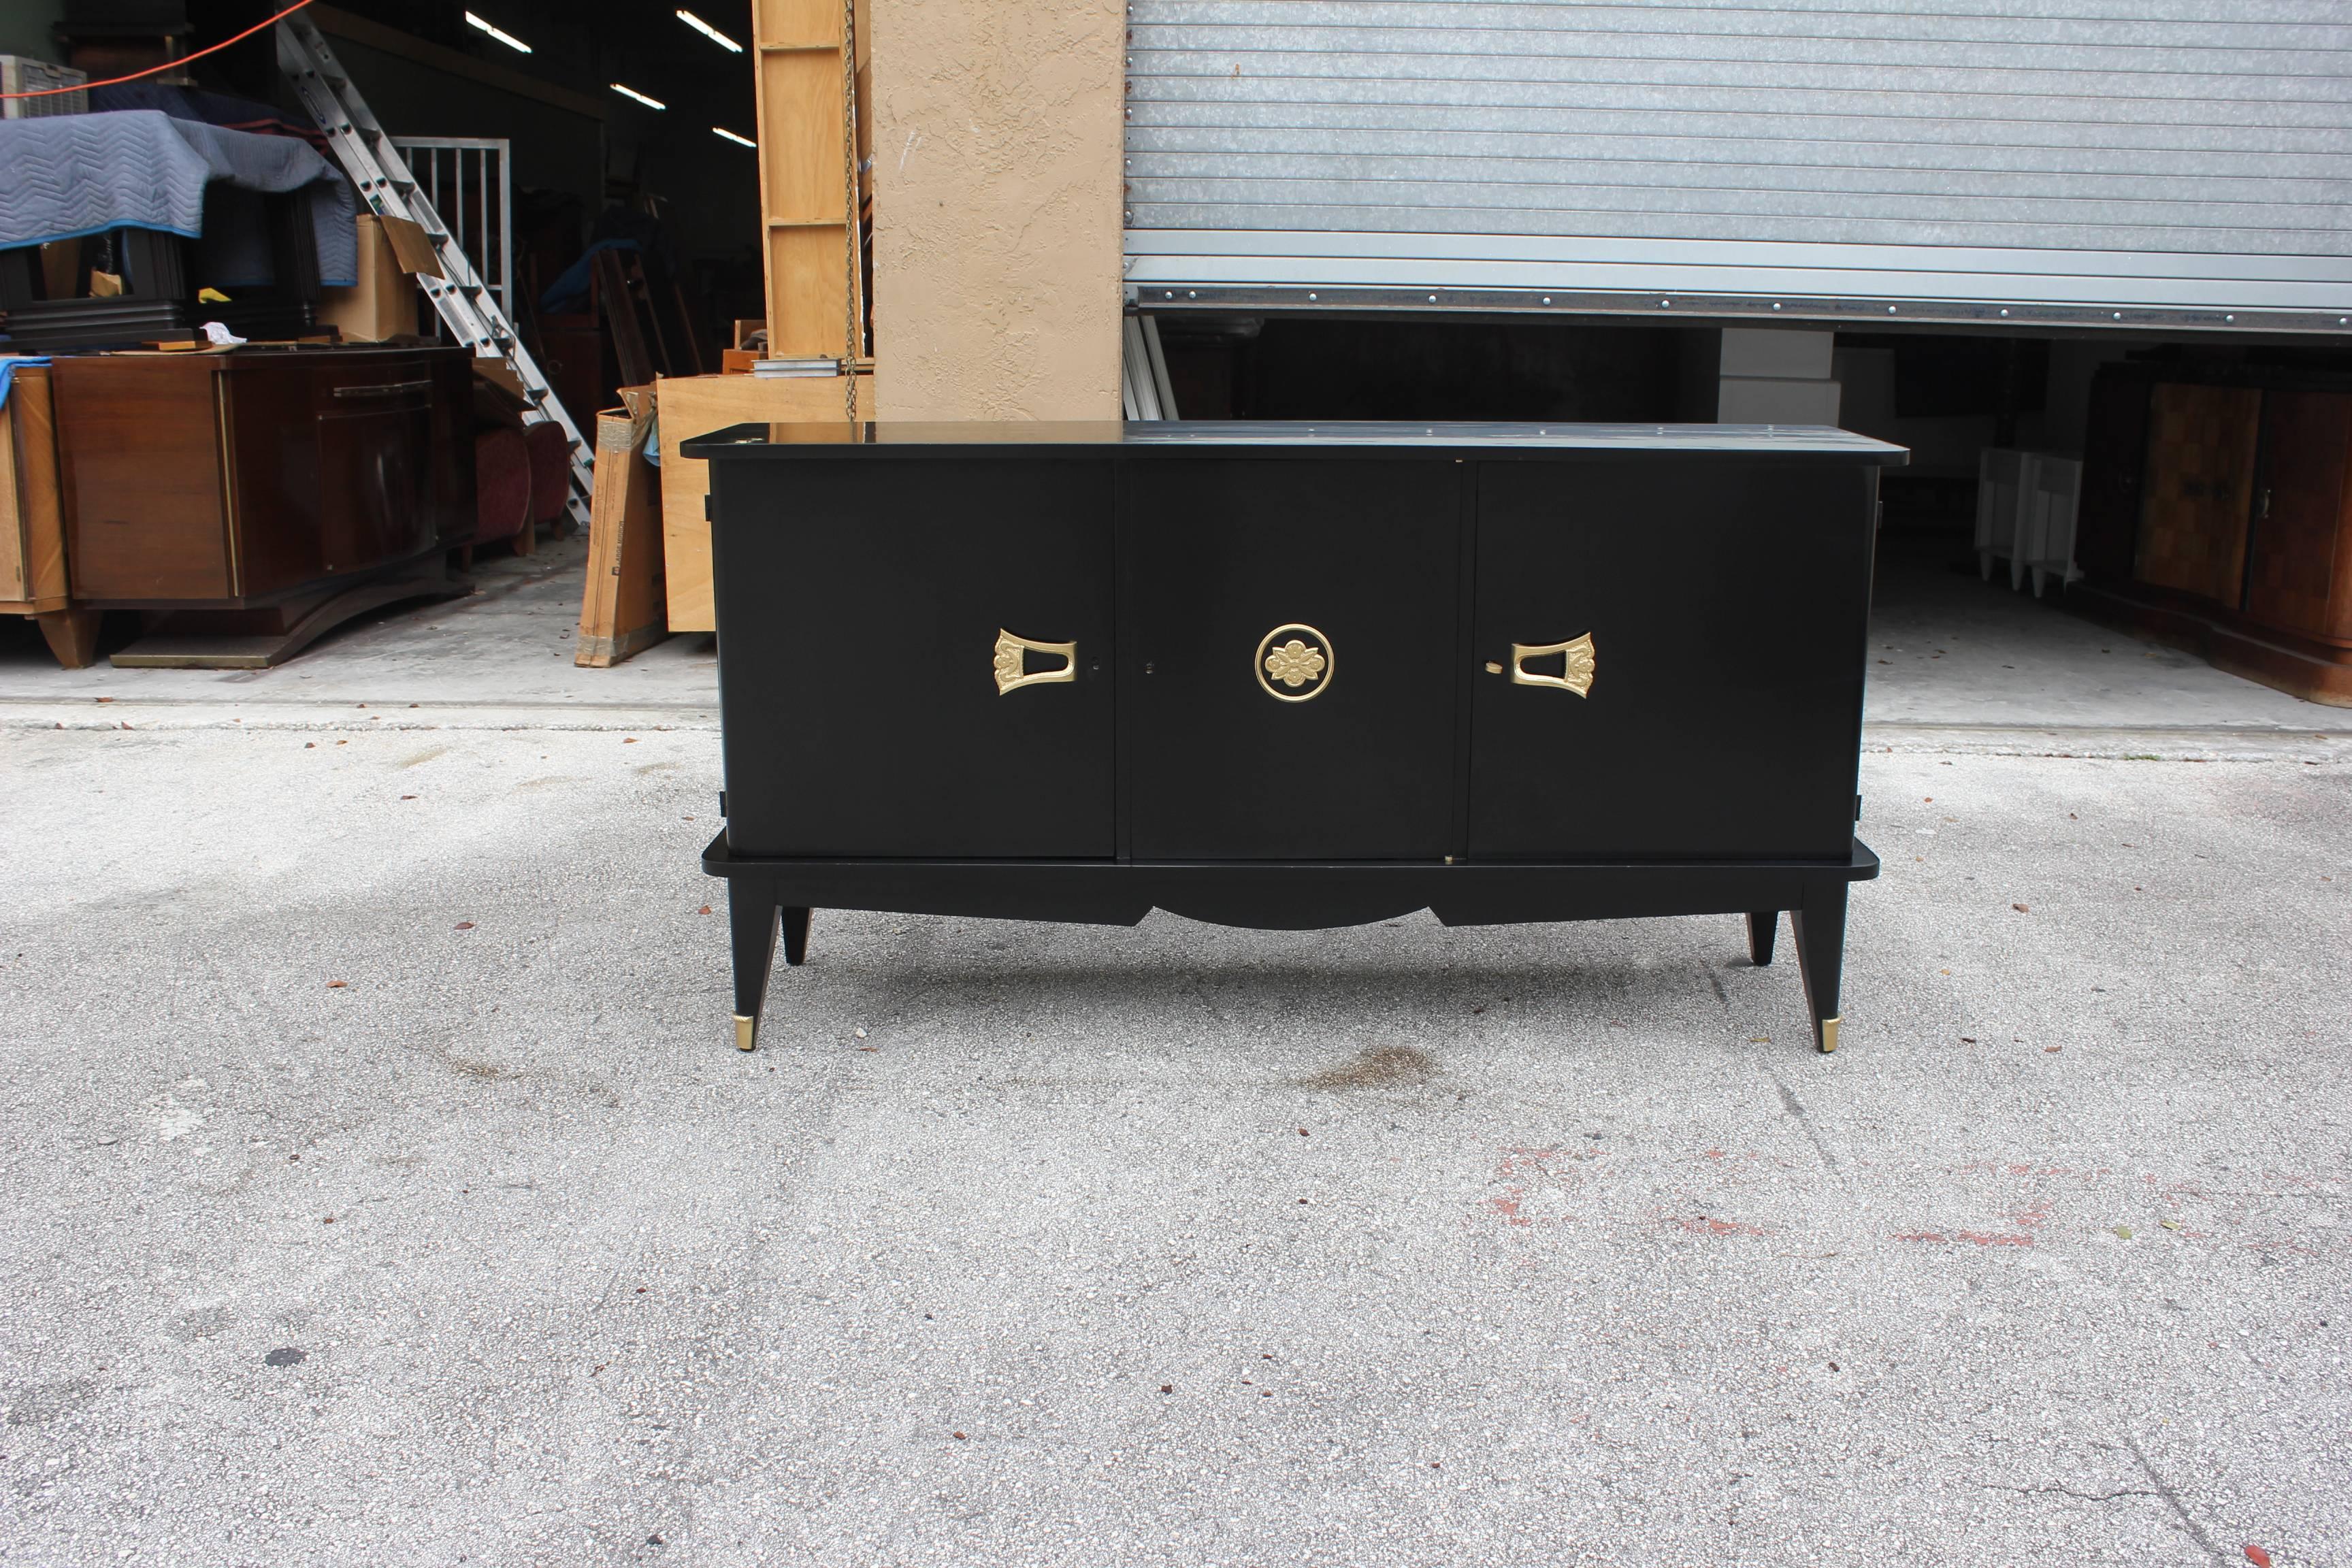 Description a French art deco, sideboard, buffet or bar ebonized finish. Beautifully, circa 1940s. Newly lacquered inside and out, very perfect condition. Dimensions: 71.0